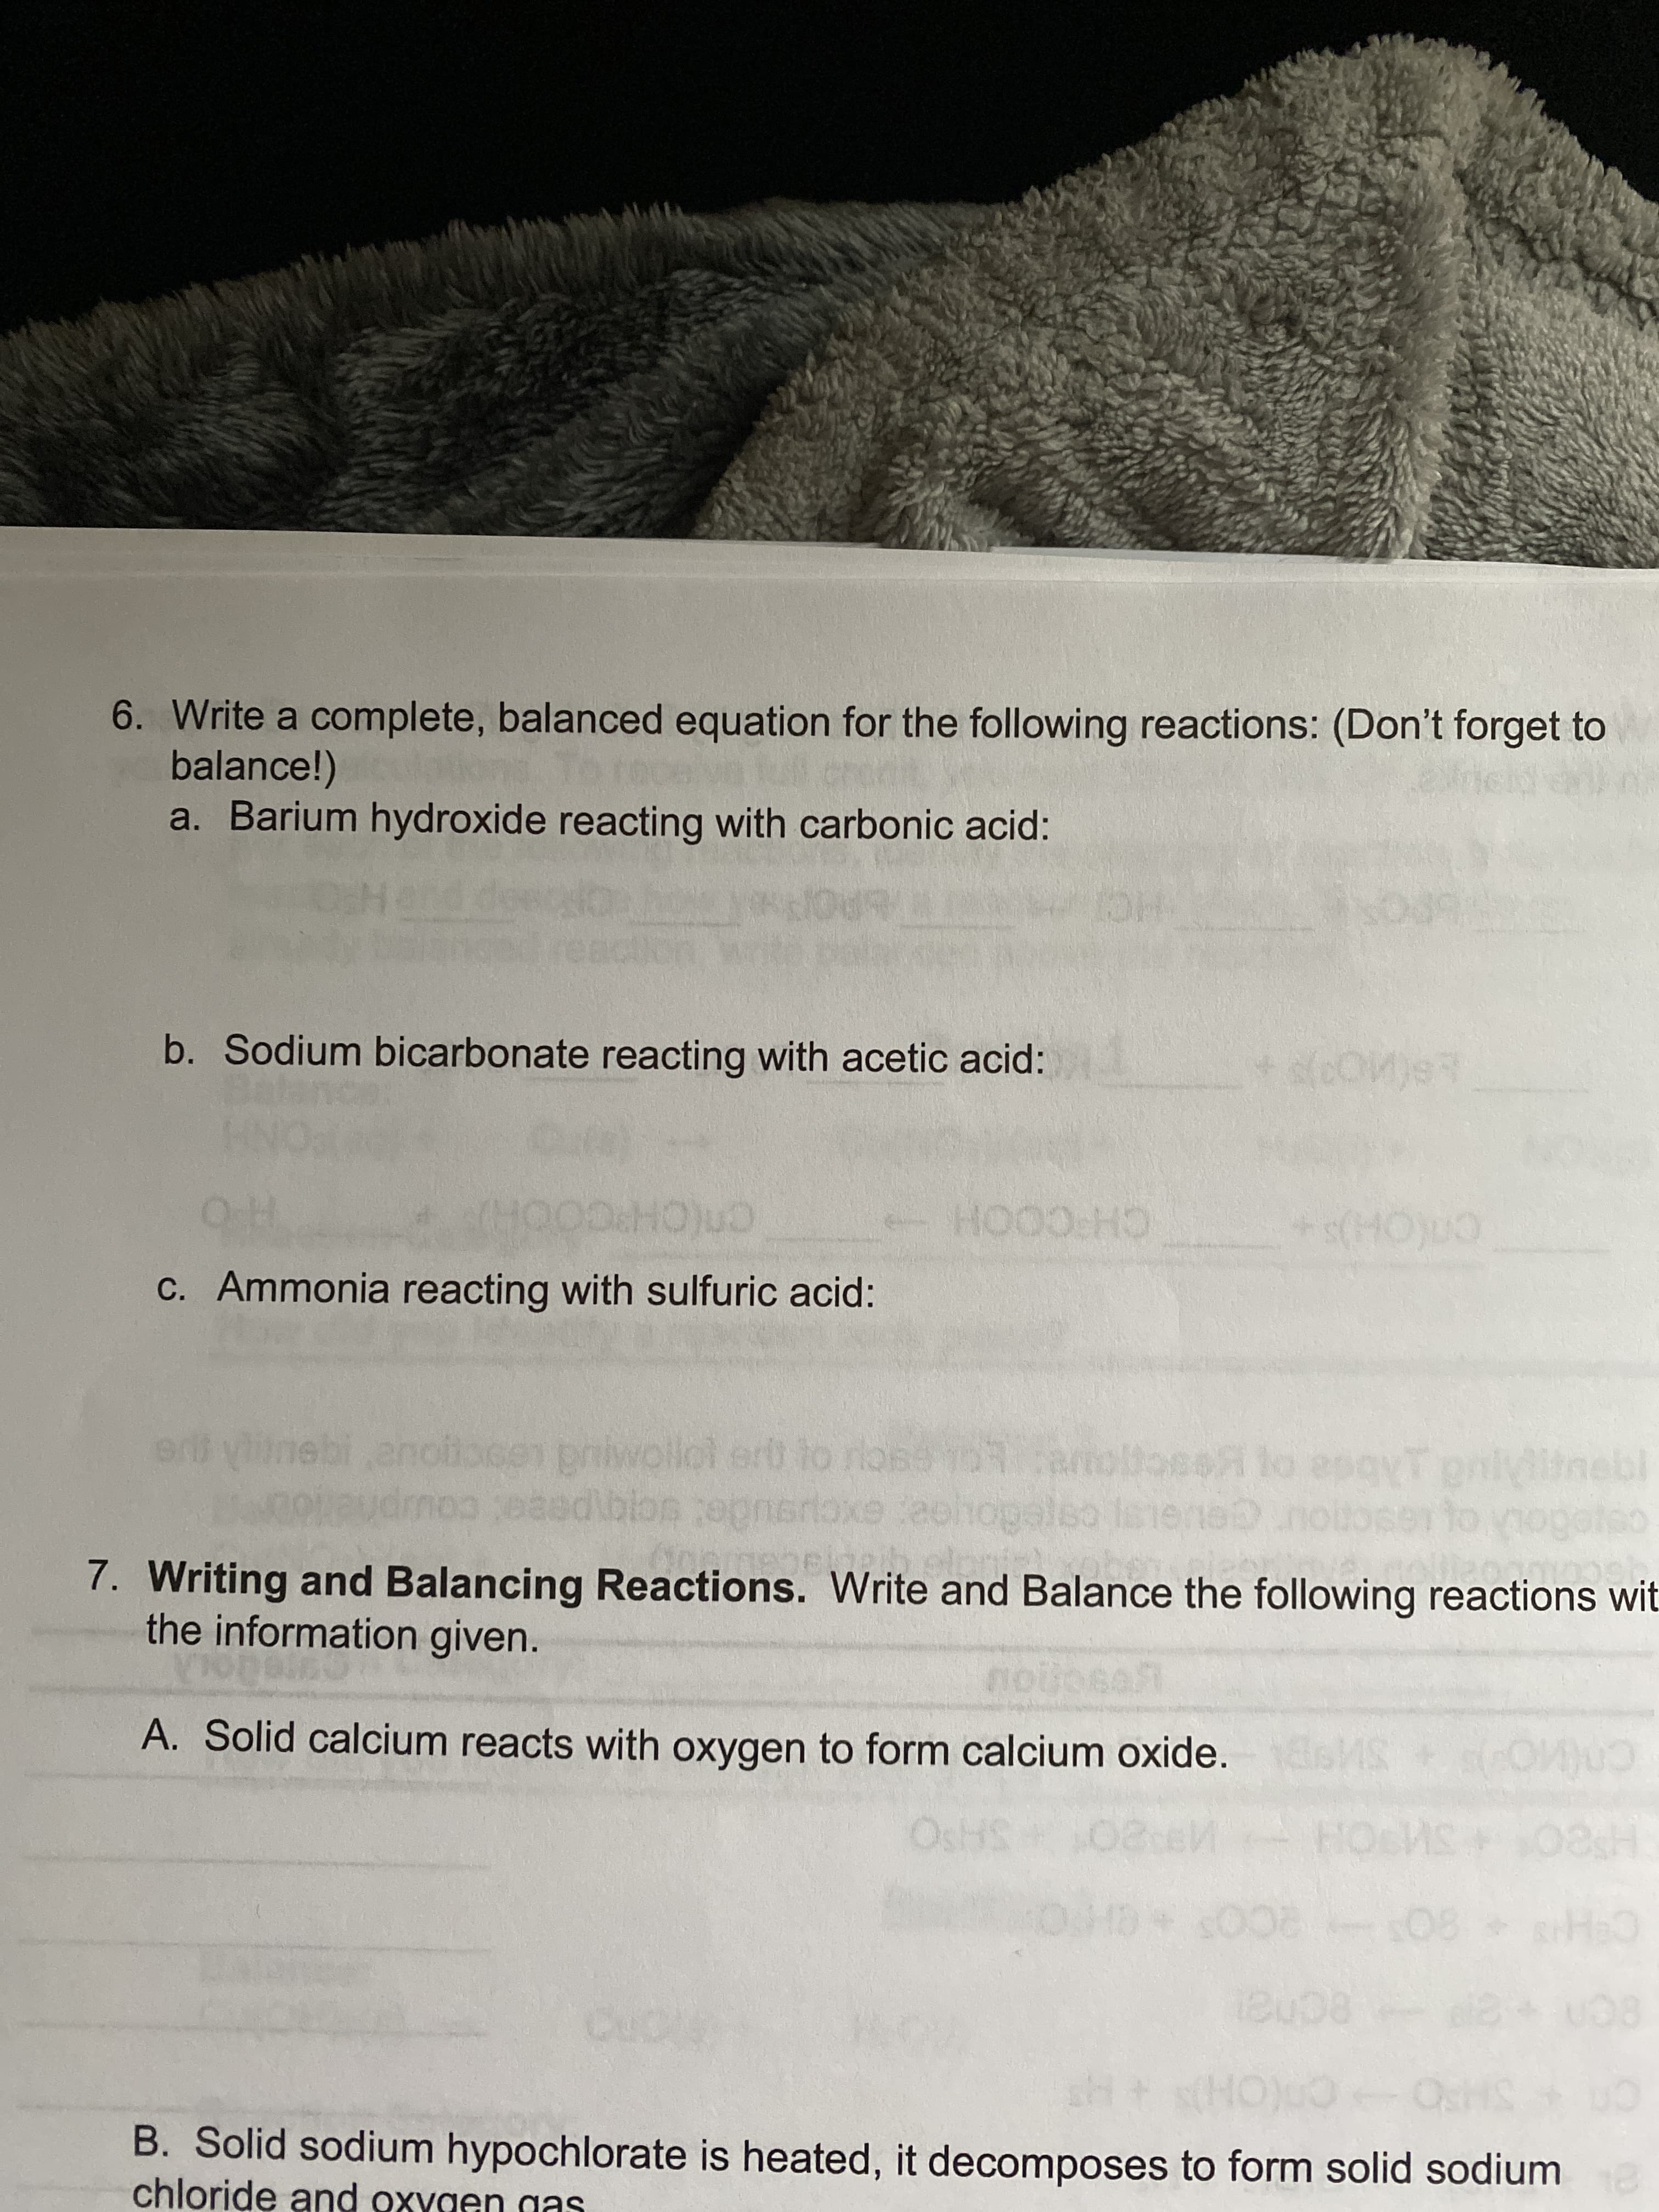 6. Write a complete, balanced equation for the following reactions: (Don't forget to
balance!)
a. Barium hydroxide reacting with carbonic acid:
b. Sodium bicarbonate reacting with acetic acid:
cn(CH°C
c. Ammonia reacting with sulfuric acid:
CH COOH
anoiocen priwollot ert to riose 103amoltoseA lo esqyT pnl
rtoxe eohopaleo
ue
ce
7. Writing and Balancing Reactions. Write and Balance the following reactions wit.
the information given.
A. Solid calcium reacts with oxygen to form calcium oxide.
SAPO
H8O SOH
80 2CO CHO
ecnal
SHPO
B. Solid sodium hypochlorate is heated, it decomposes to form solid sodium
chloride and oxygen gas
